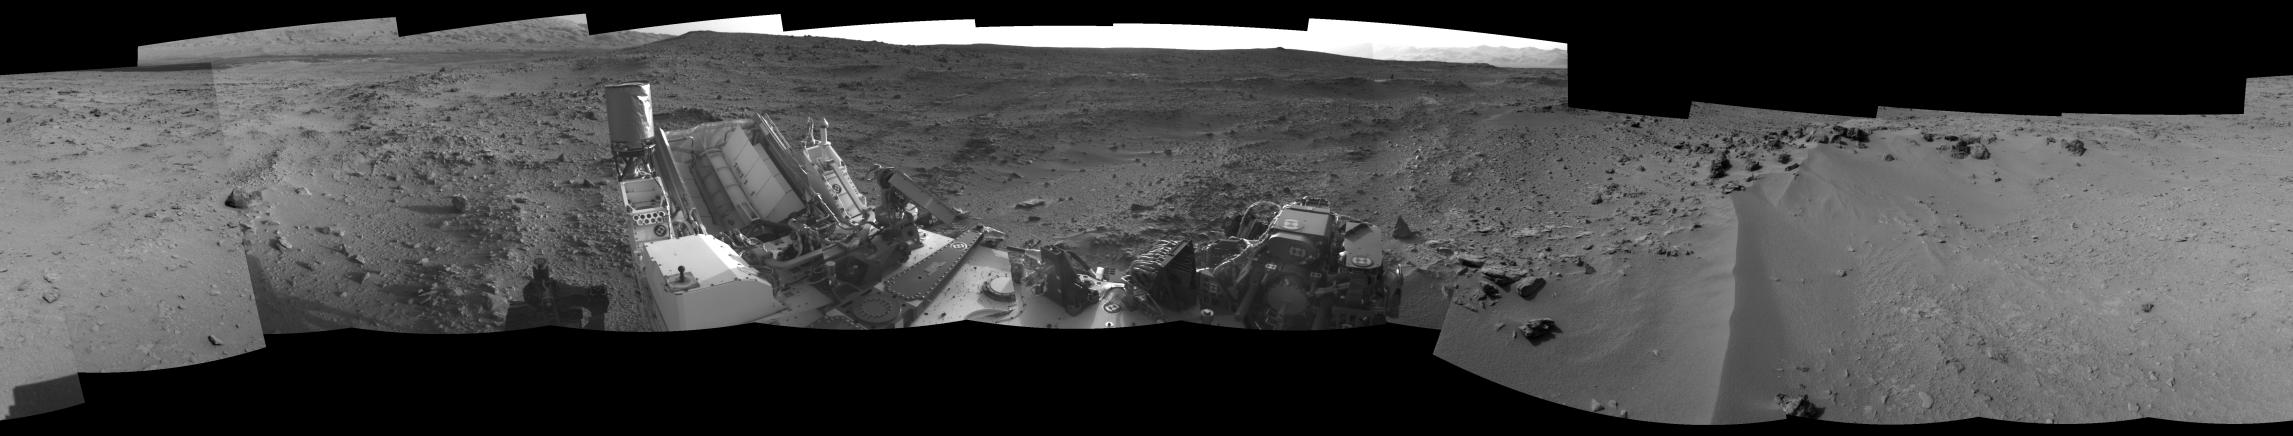 This 360-degree panorama from NASA's Mars rover Curiosity shows the rocky terrain surrounding it as of its 55th Martian day, or sol, of the mission (Oct. 1, 2012).